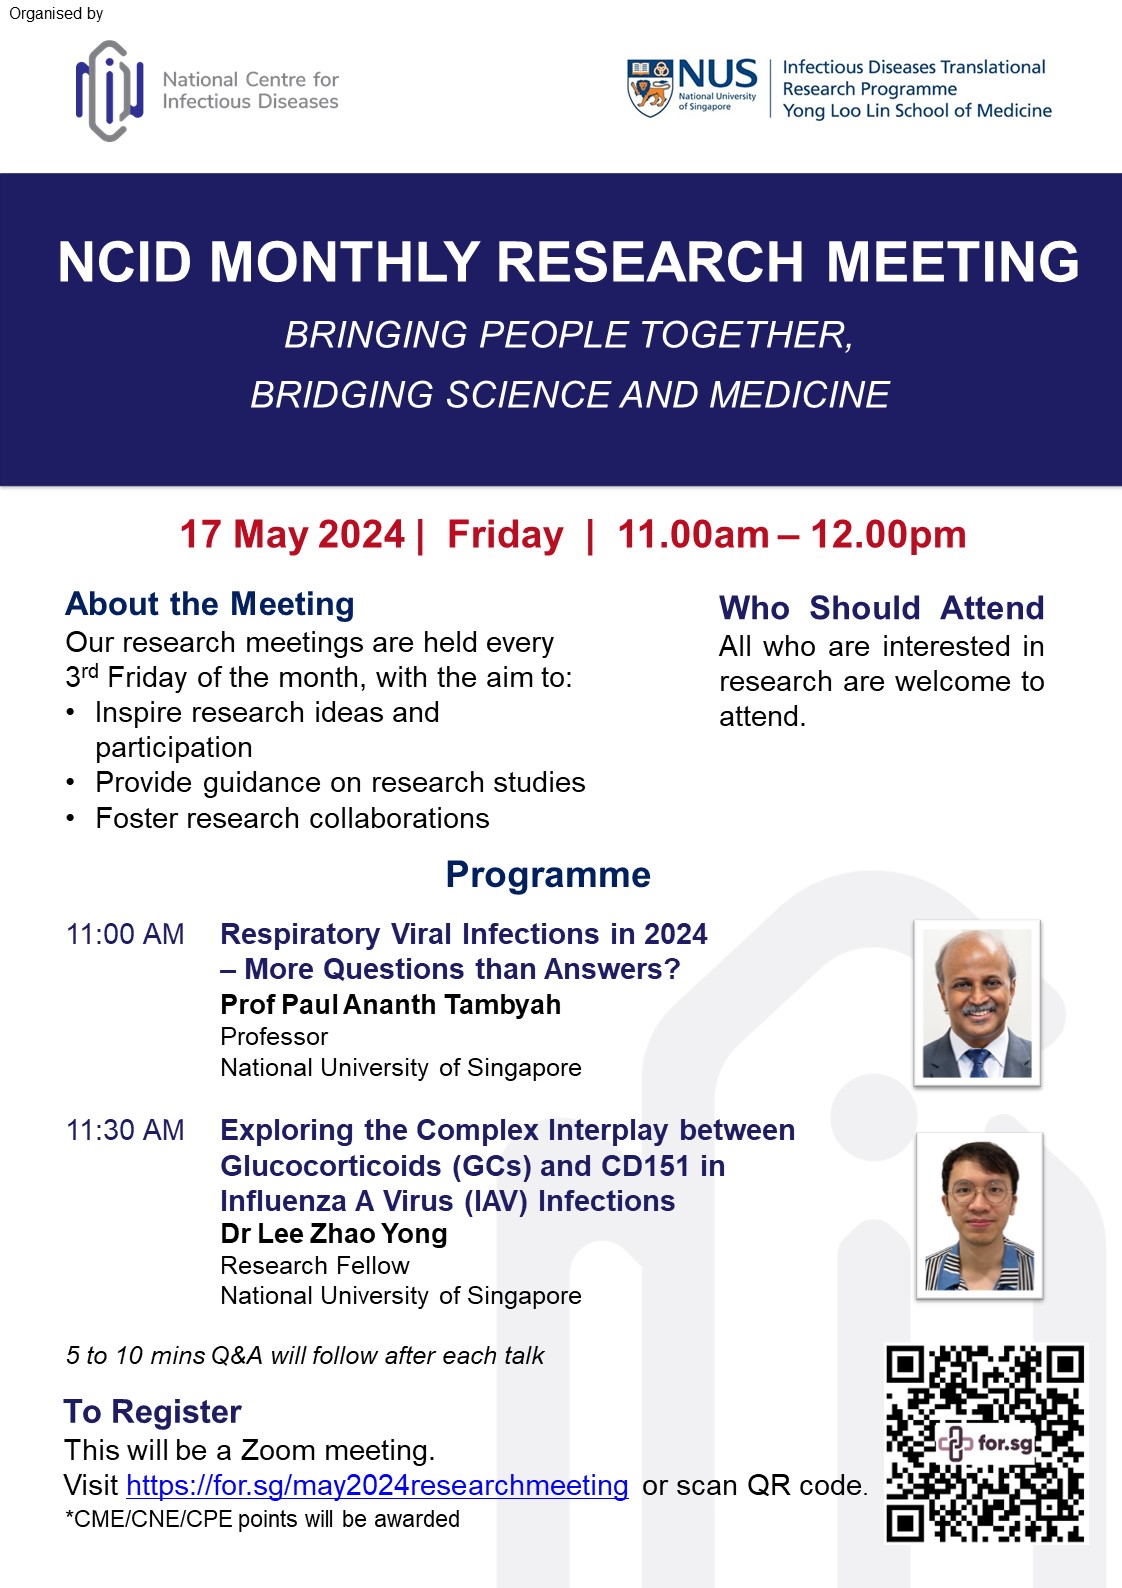 NCID Research Meeting Publicity Poster_May 2024_pg1.JPG